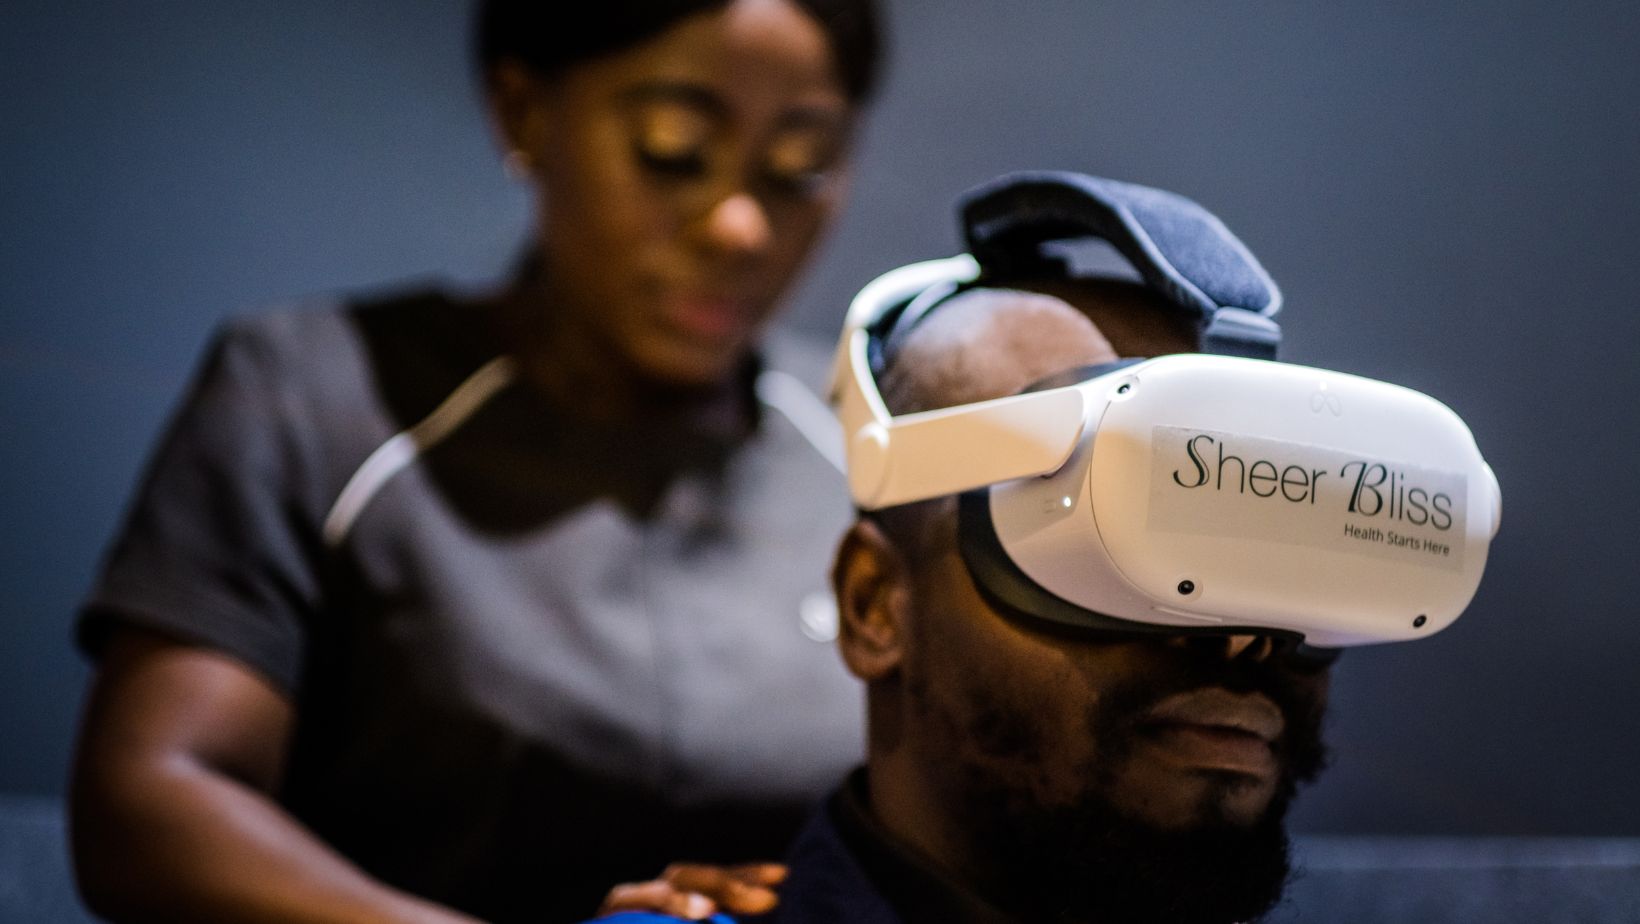 Virtual Reality Massage: Take A Vacation Without Leaving Your Desk